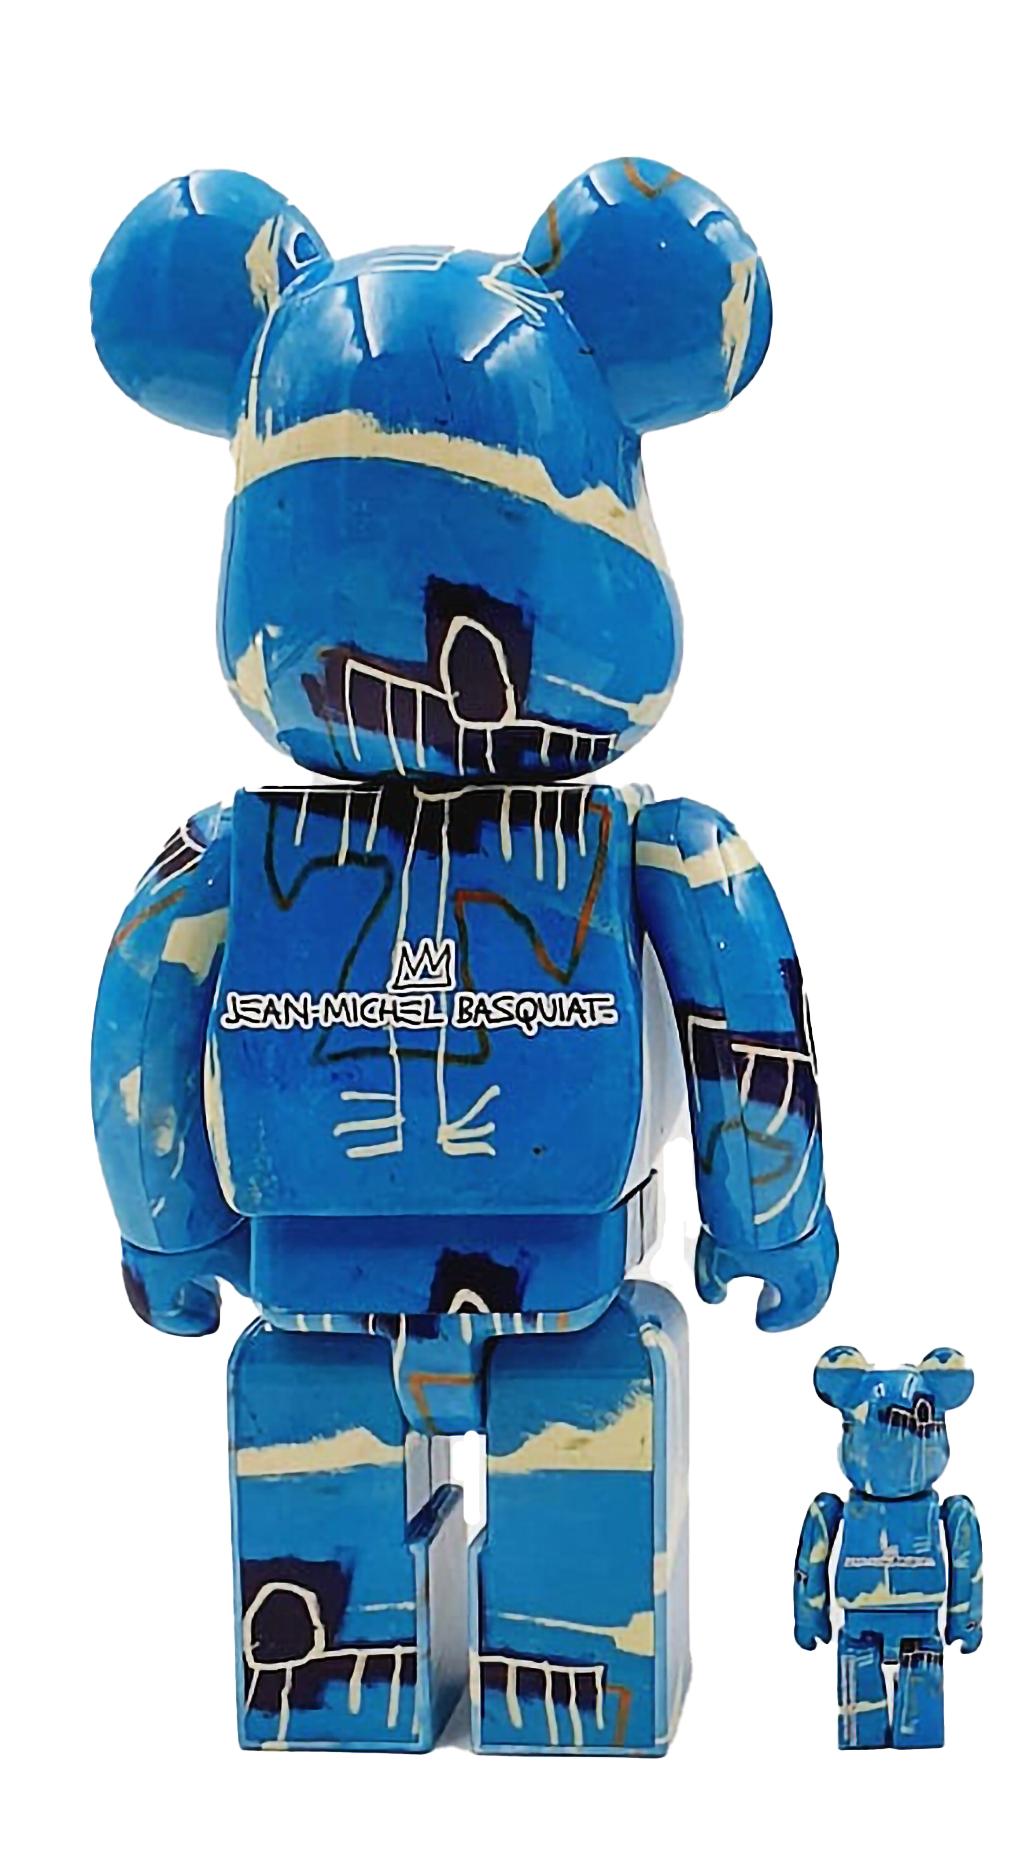 Be@rbrick x Estate of Jean-Michel Basquiat Vinyl Figures: Set of two (400% & 100%):
A unique, timeless limited edition Basquiat collectible trademarked & licensed by the Estate of Jean-Michel Basquiat. The partnered collectible reveals details from